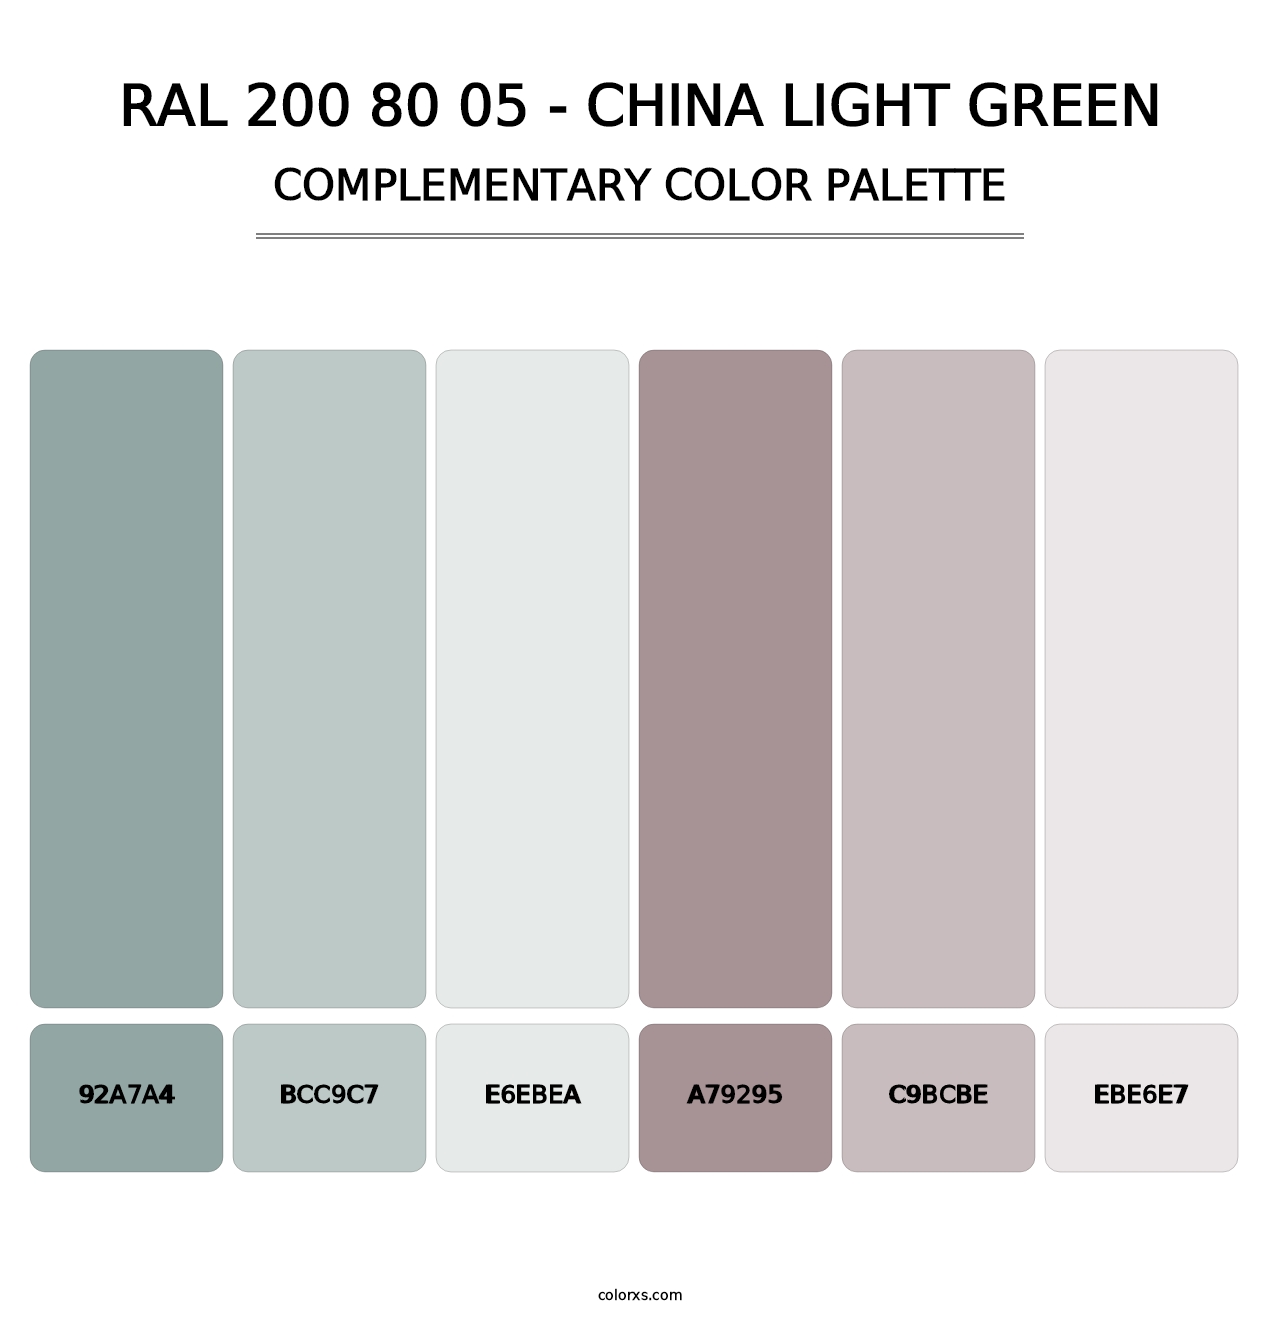 RAL 200 80 05 - China Light Green - Complementary Color Palette